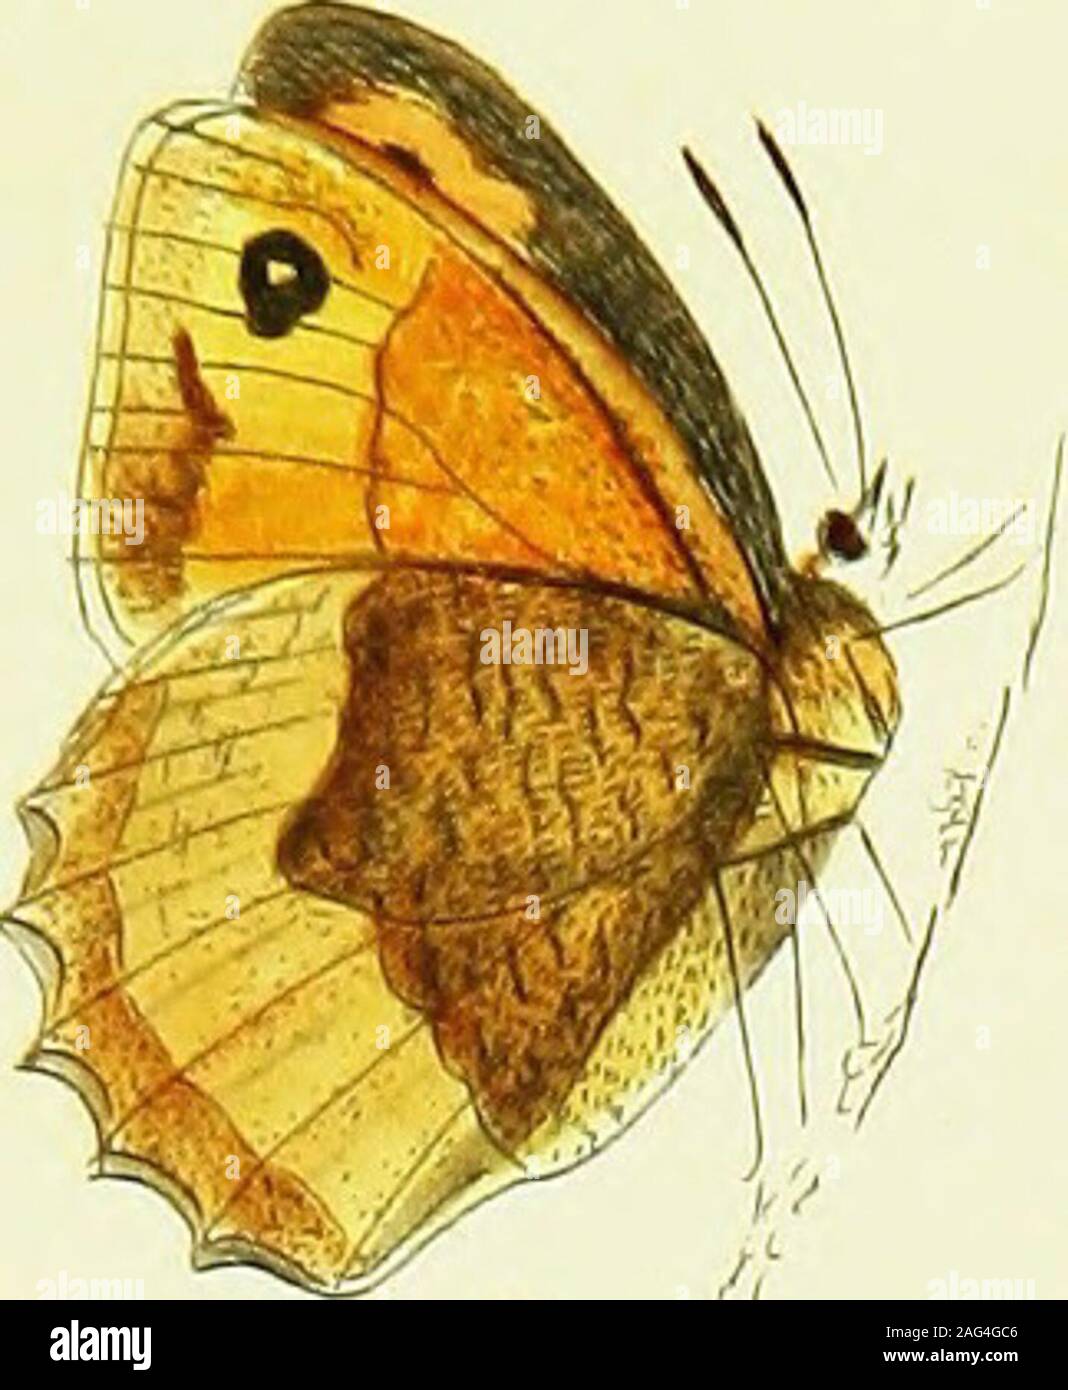 . The papilios of Great Britain, systematically arranged, accurately engraved, and painted from nature, with the natural history of each species, from a close application to the subject, and observations made in different countries of this kingdom; as well as from breeding numbers from the egg, or caterpillar, during the last thirty years. ance in fize, they venture out in the even-ing, and feed more generally. I have no doubt but this cautious manner offeeding is their great protection from their enemies the ichneumon fly andbirds. This will in fome meafure account for the fmooth caterpillars Stock Photo